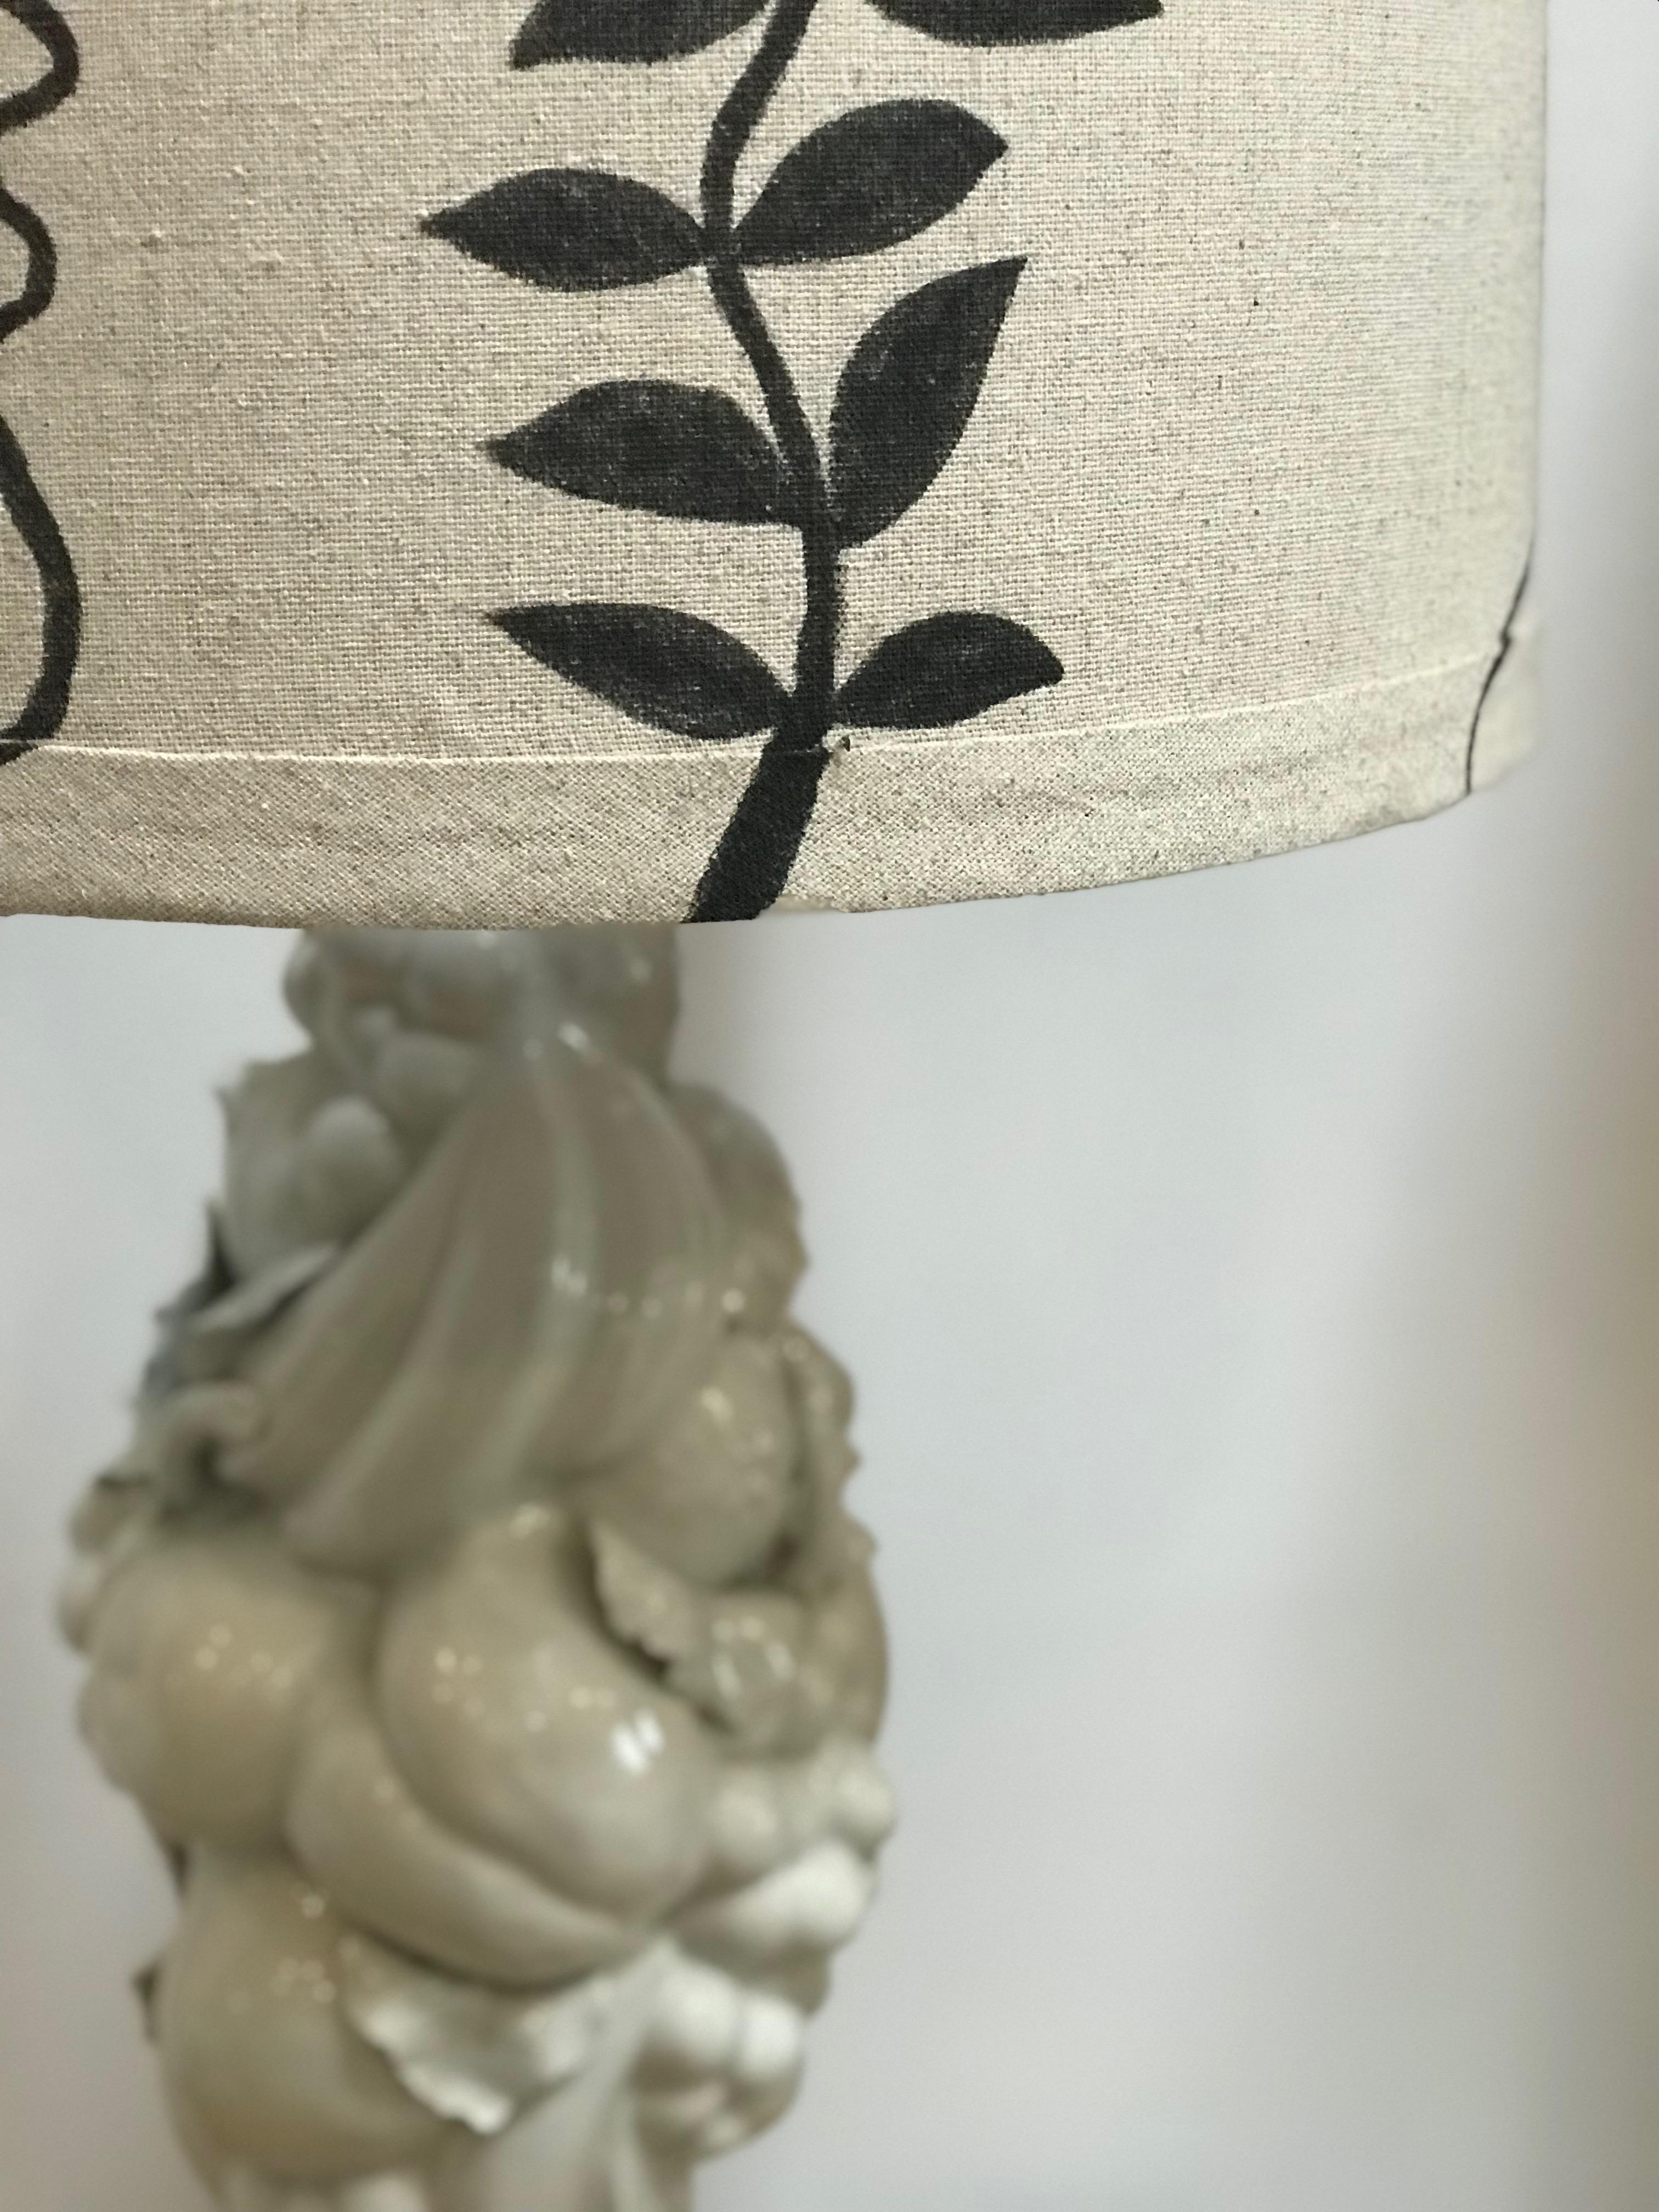 20th Century Hand Painted Shade by RF. Alvarez on 1970s Blanc De Chine Topiary Table Lamp